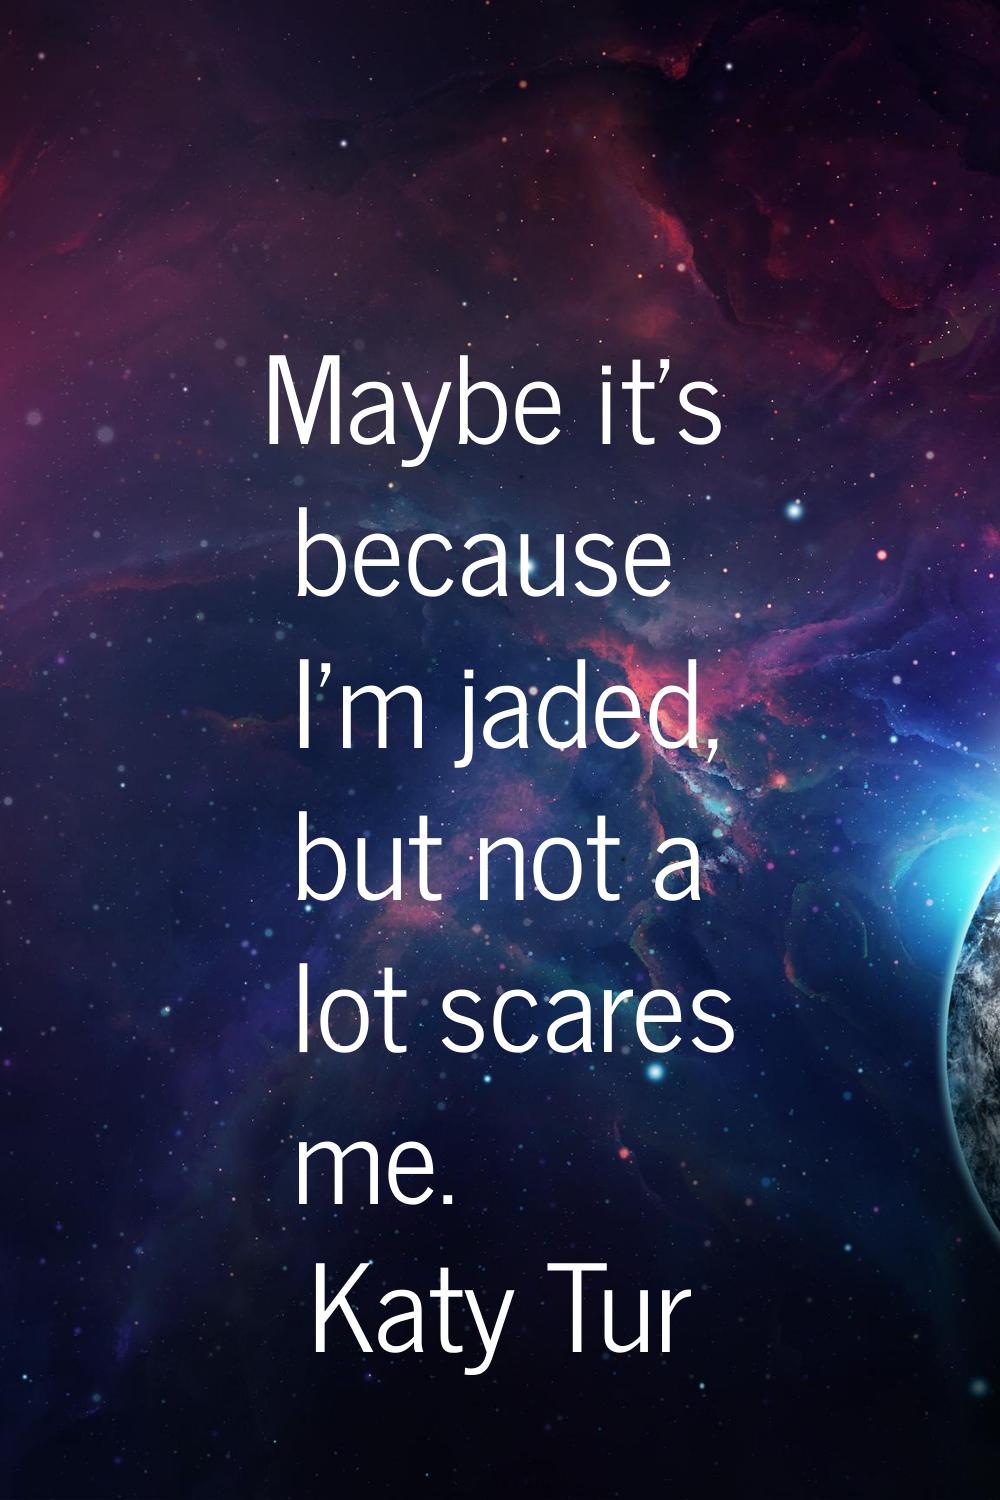 Maybe it's because I'm jaded, but not a lot scares me.